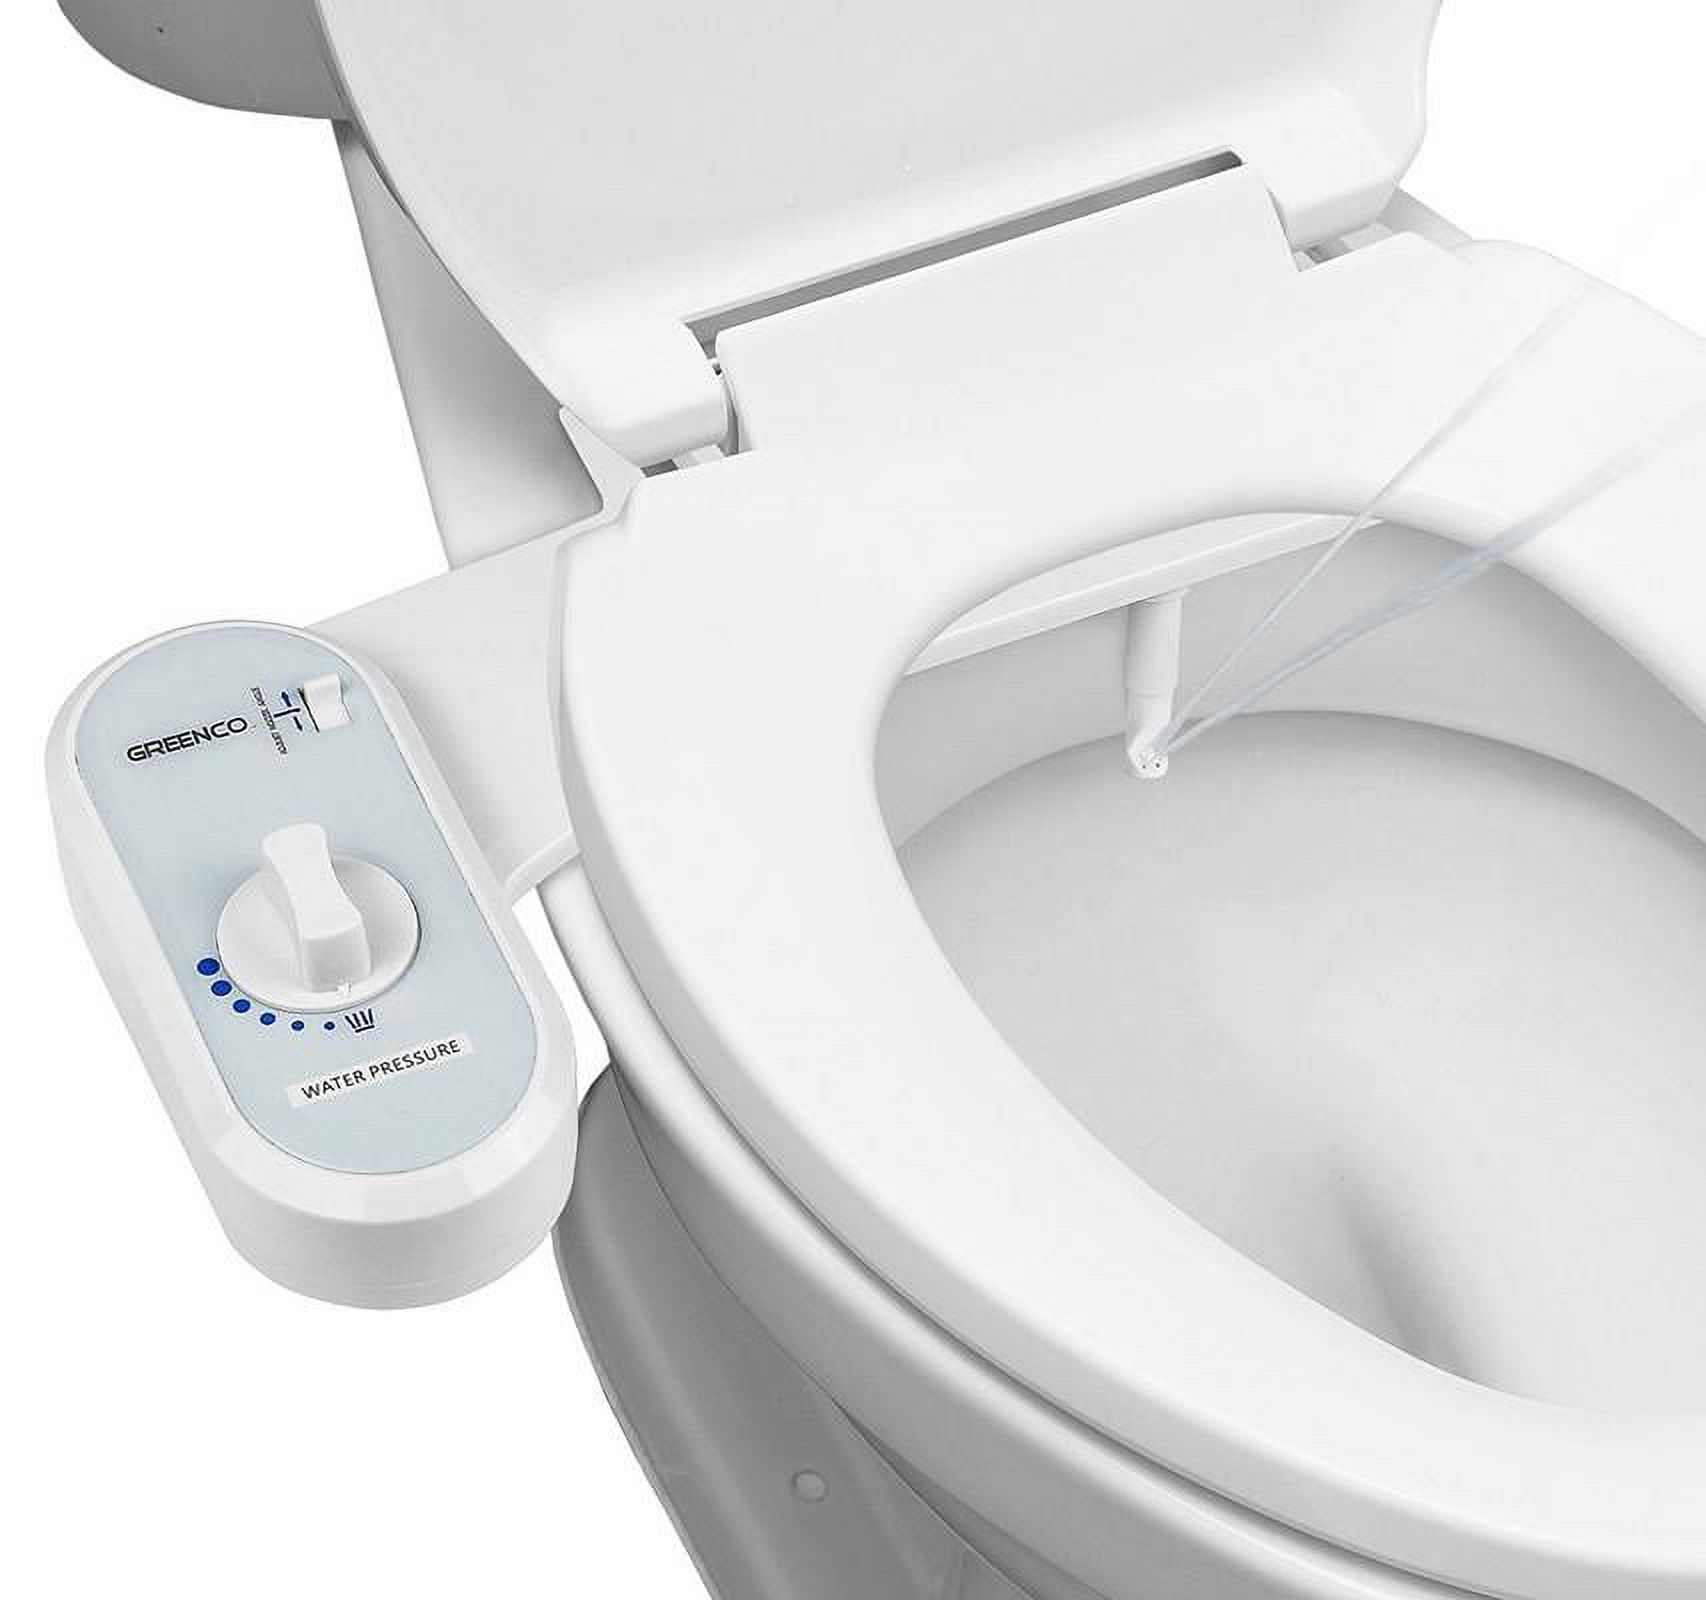 Greenco Bidet Fresh Water Spray Non-Electric Mechanical | Bidet attachment for Toilet Seat - image 1 of 8